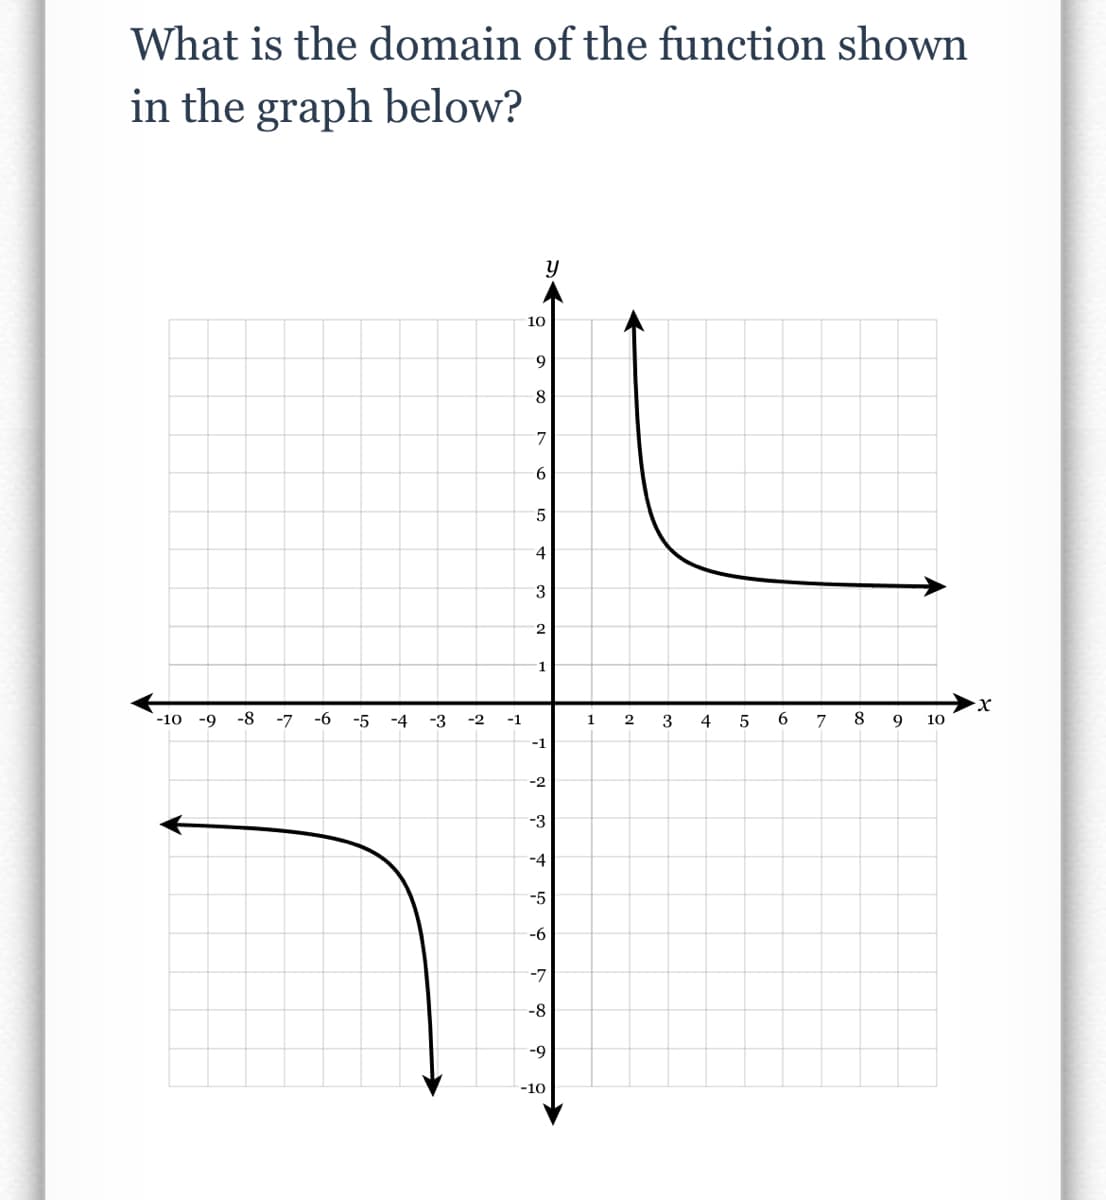 What is the domain of the function shown
in the graph below?
10
6.
8.
7
4
3
1
-10
-9
-8
-7
-6
-5
-4
-3
-2
-1
3
4
6.
7
8
9
10
-1
-2
-3
-4
-5
-6
-7
-8
-9
-10
